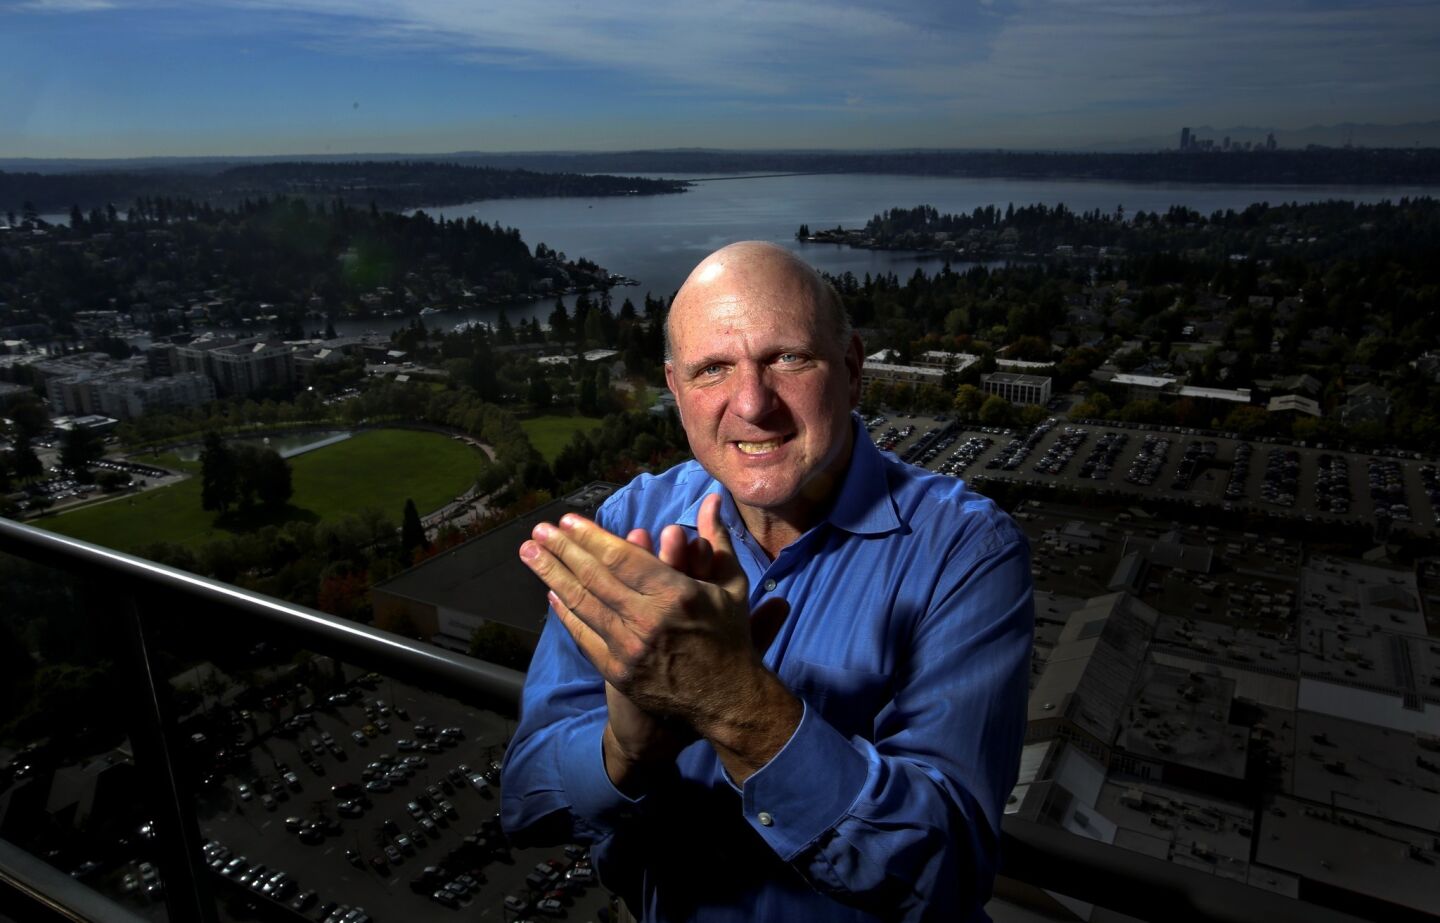 New Clippers owner Steve Ballmer on the balcony of his office in Bellevue, Wash., that overlooks Lake Washington.